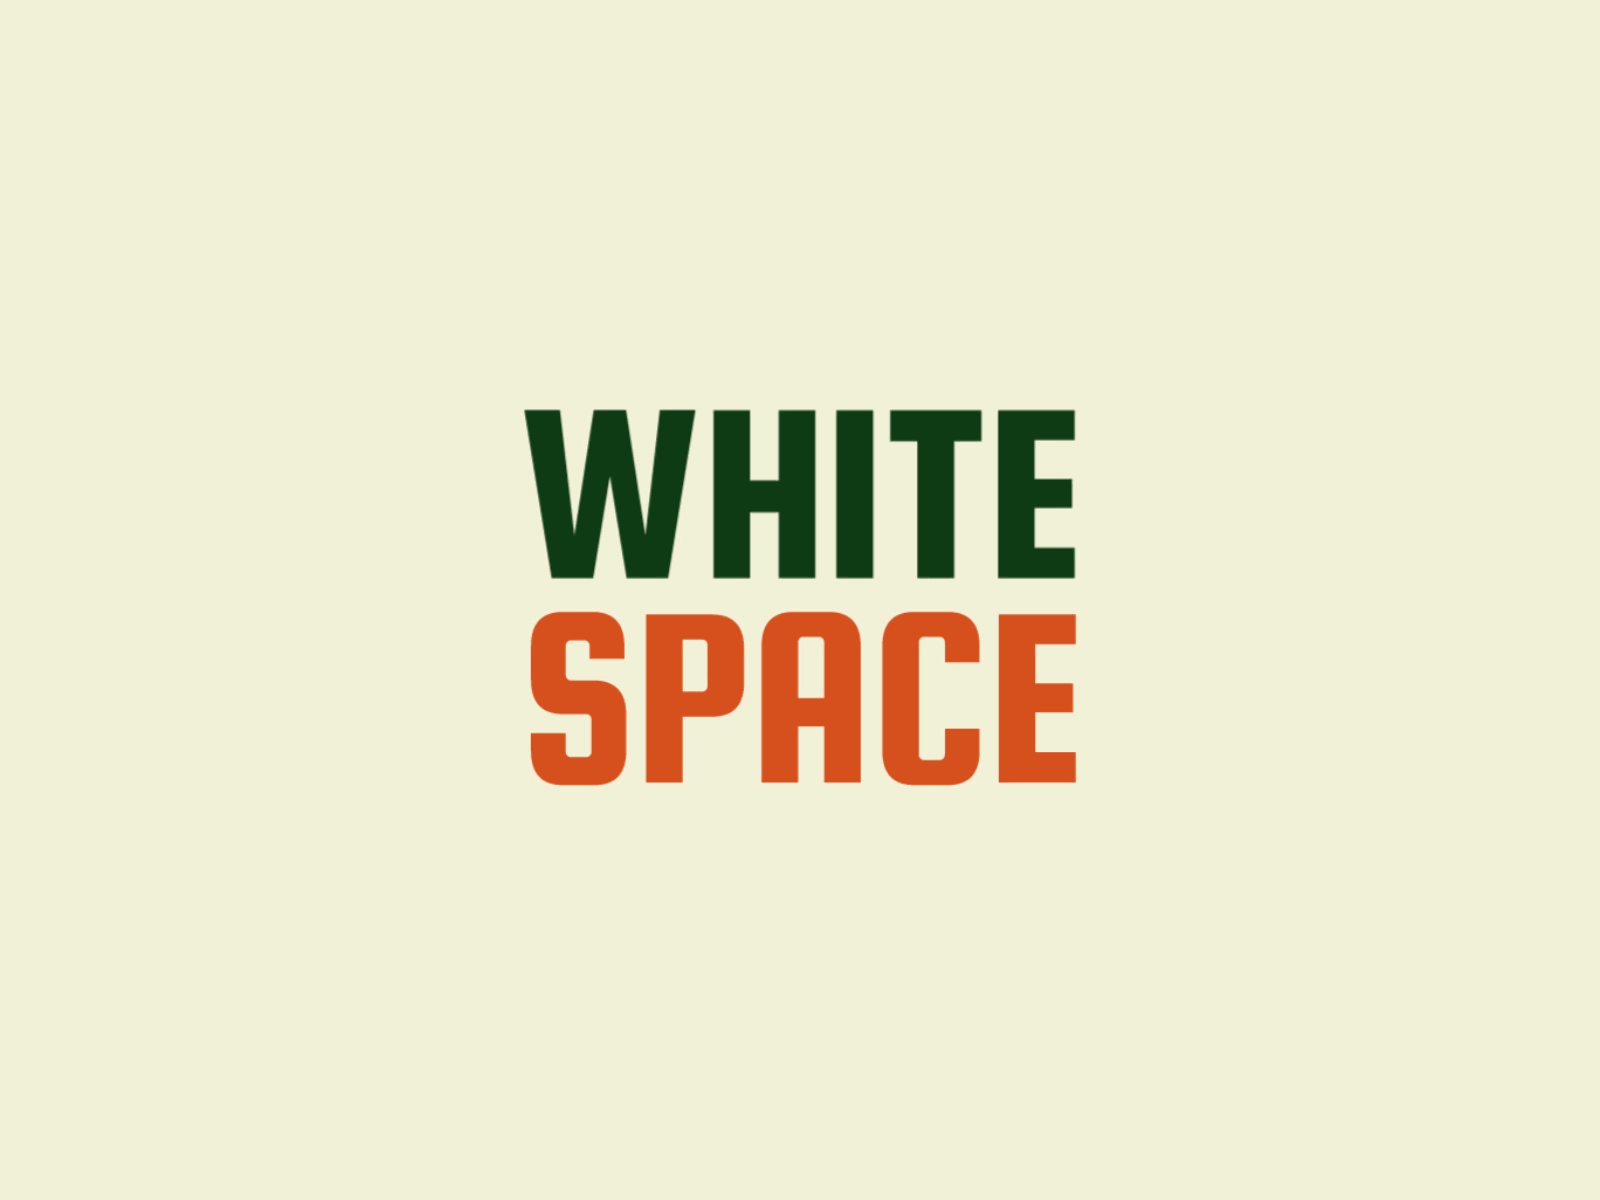 Design Principles Animation — White Space by Mike Davies on Dribbble